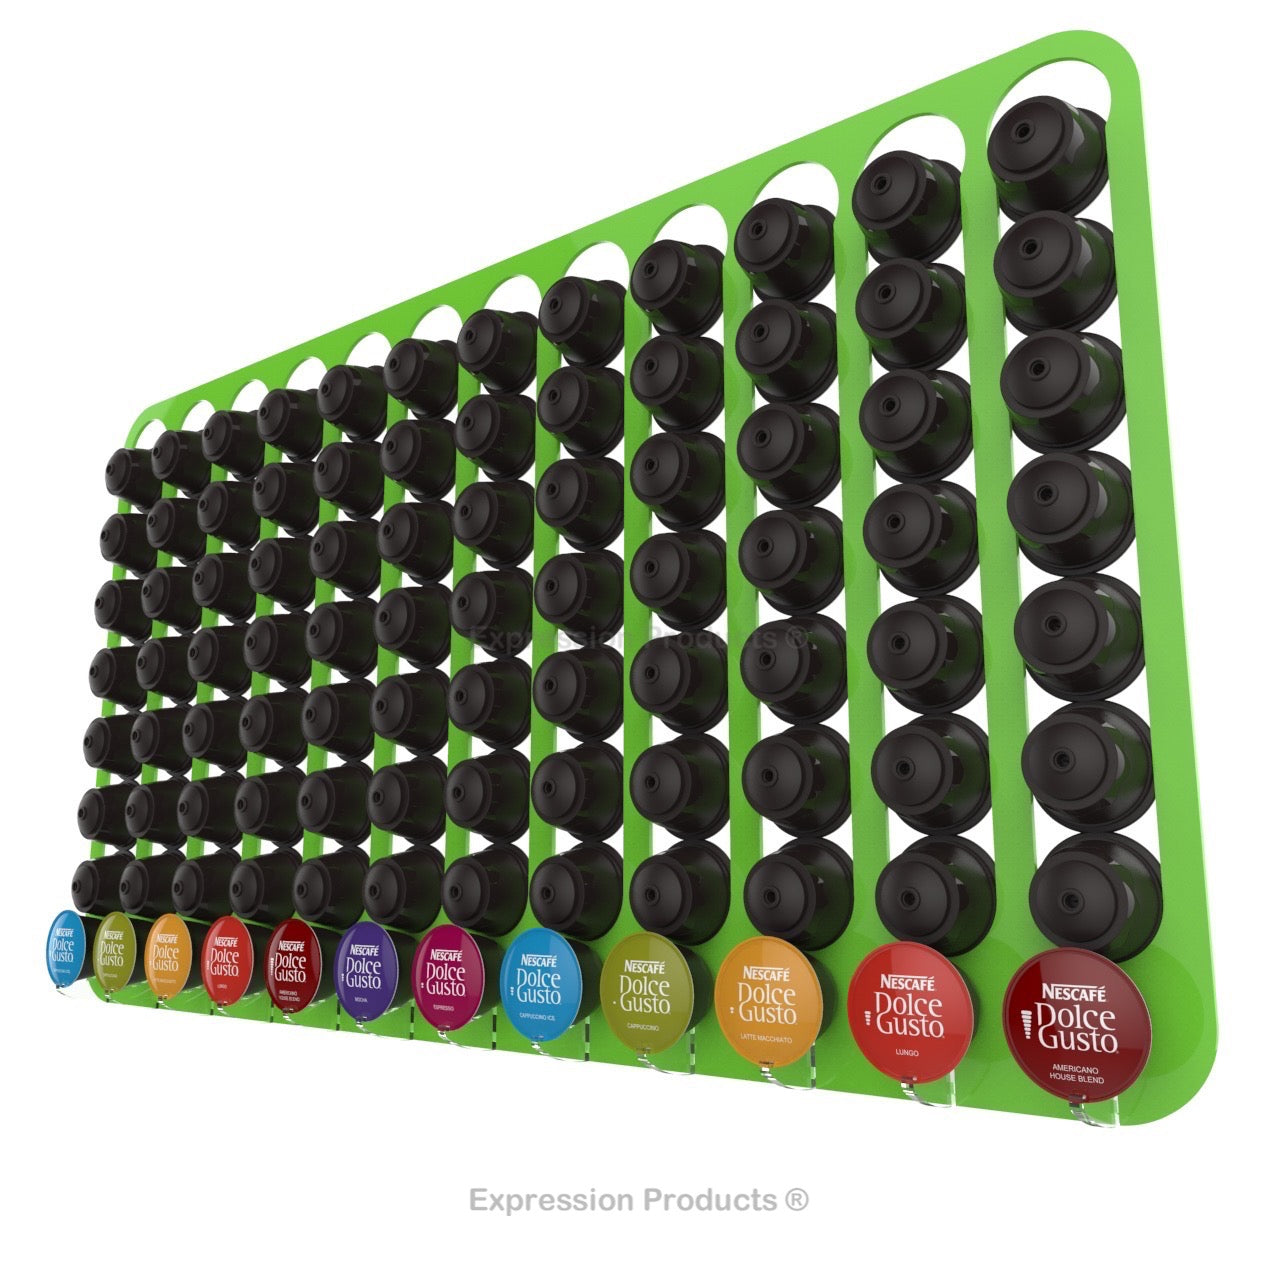 Dolce Gusto Coffee Pod Holder, Wall Mounted.  Shown in Lime Holding 96 Pods